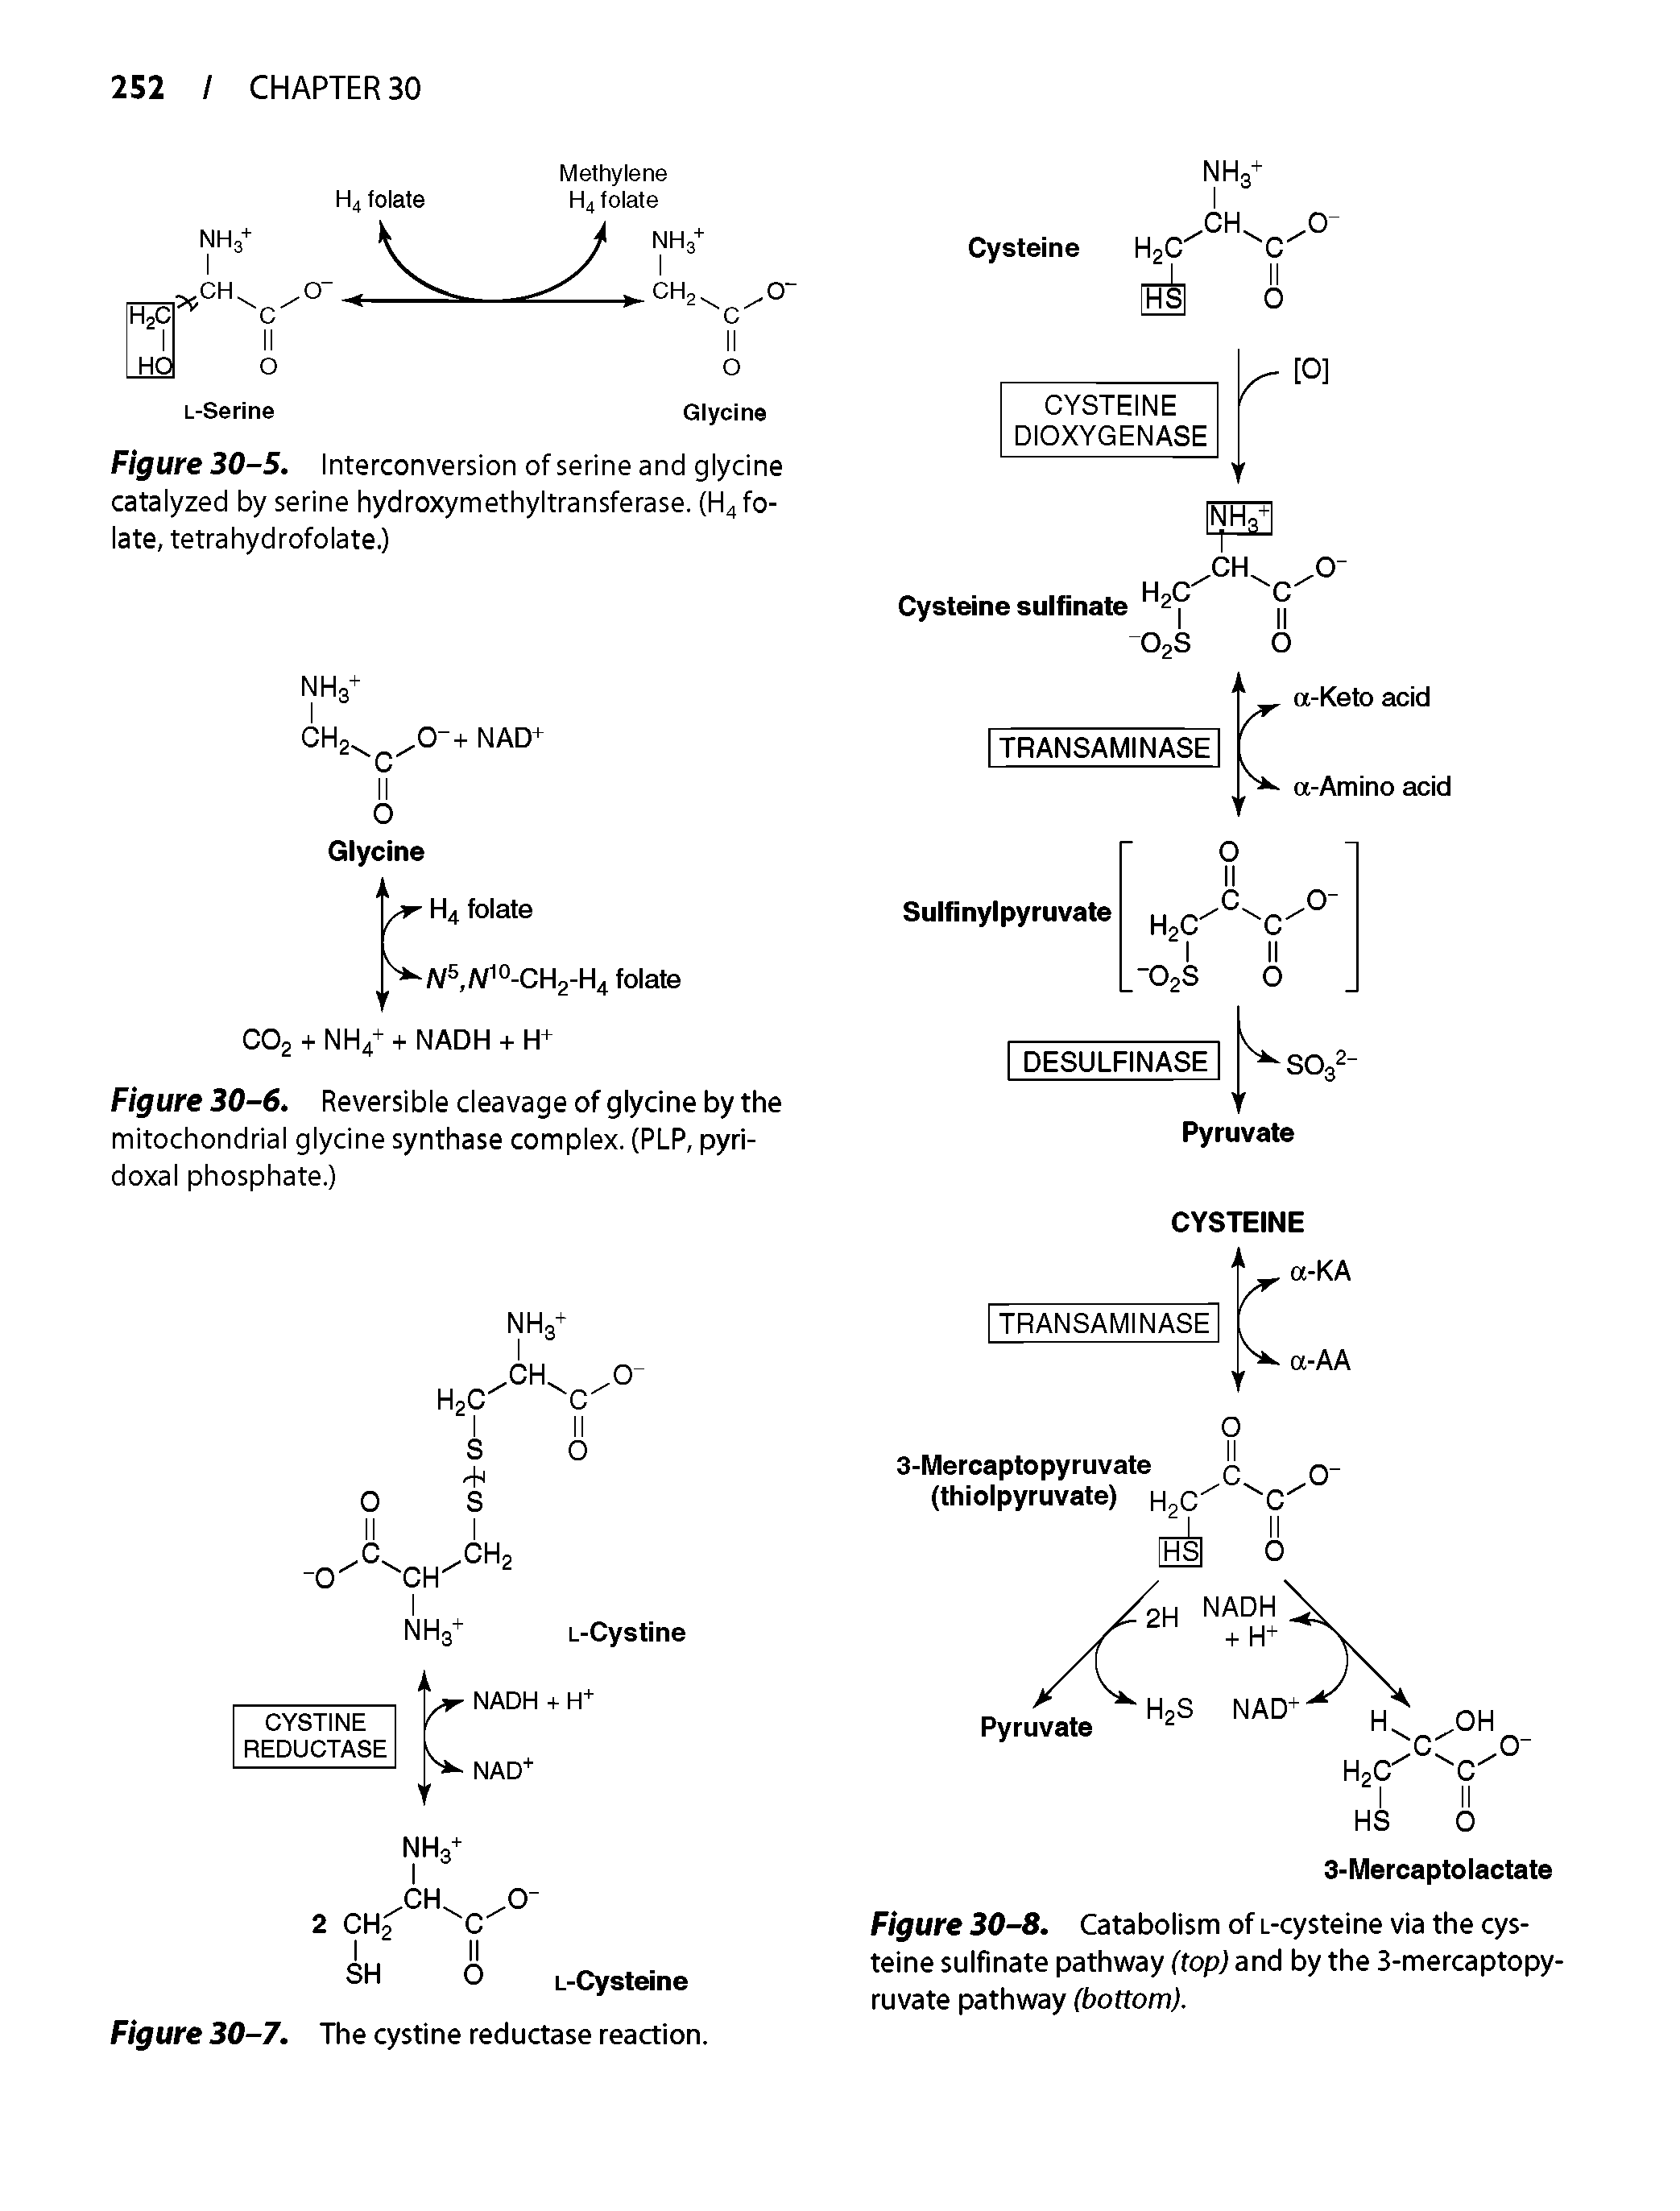 Figure 30-8. Catabolism of i-cysteine via the cysteine sulfinate pathway (top) and by the 3-mercaptopy-ruvate pathway (bottom).